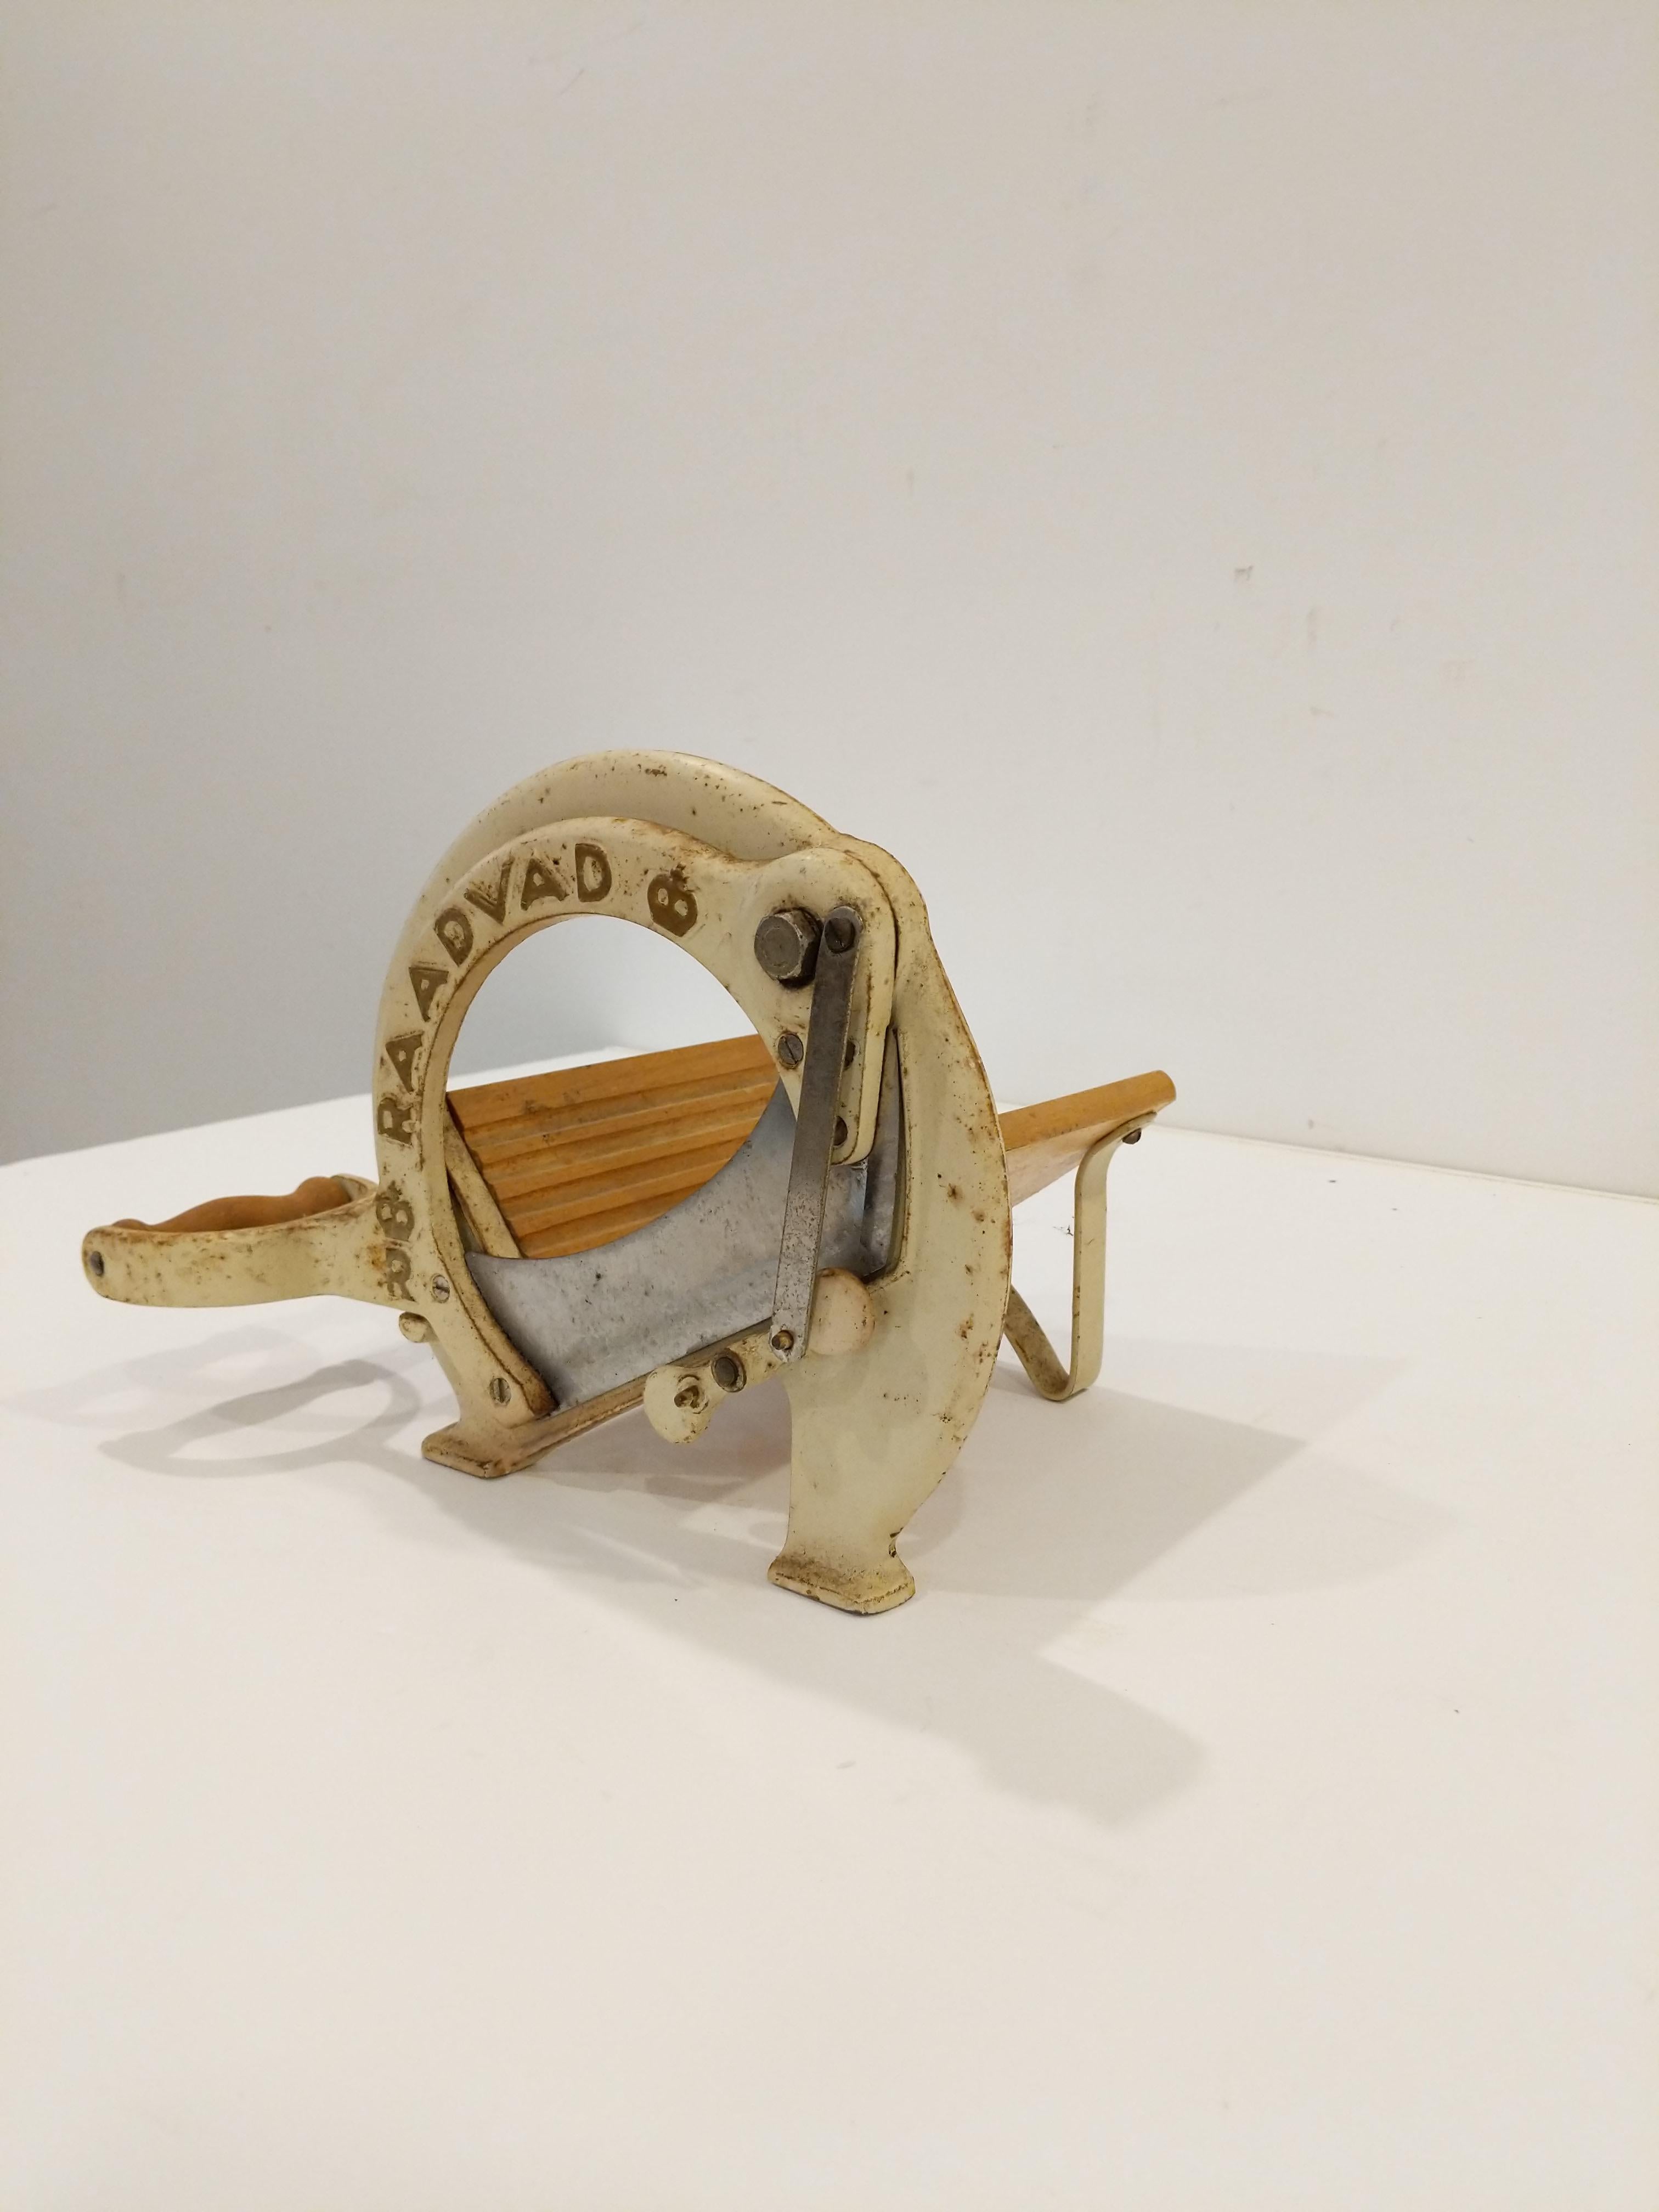 Authentic vintage Danish bread slicer / guillotine in cream.

Model 294 by Raadvad.

This slicer is in good condition overall and expectedly shows its age a bit.

Dimensions:
13.5” Long including handle
9.5” Tall
8” Wide

Ref: RV26-006